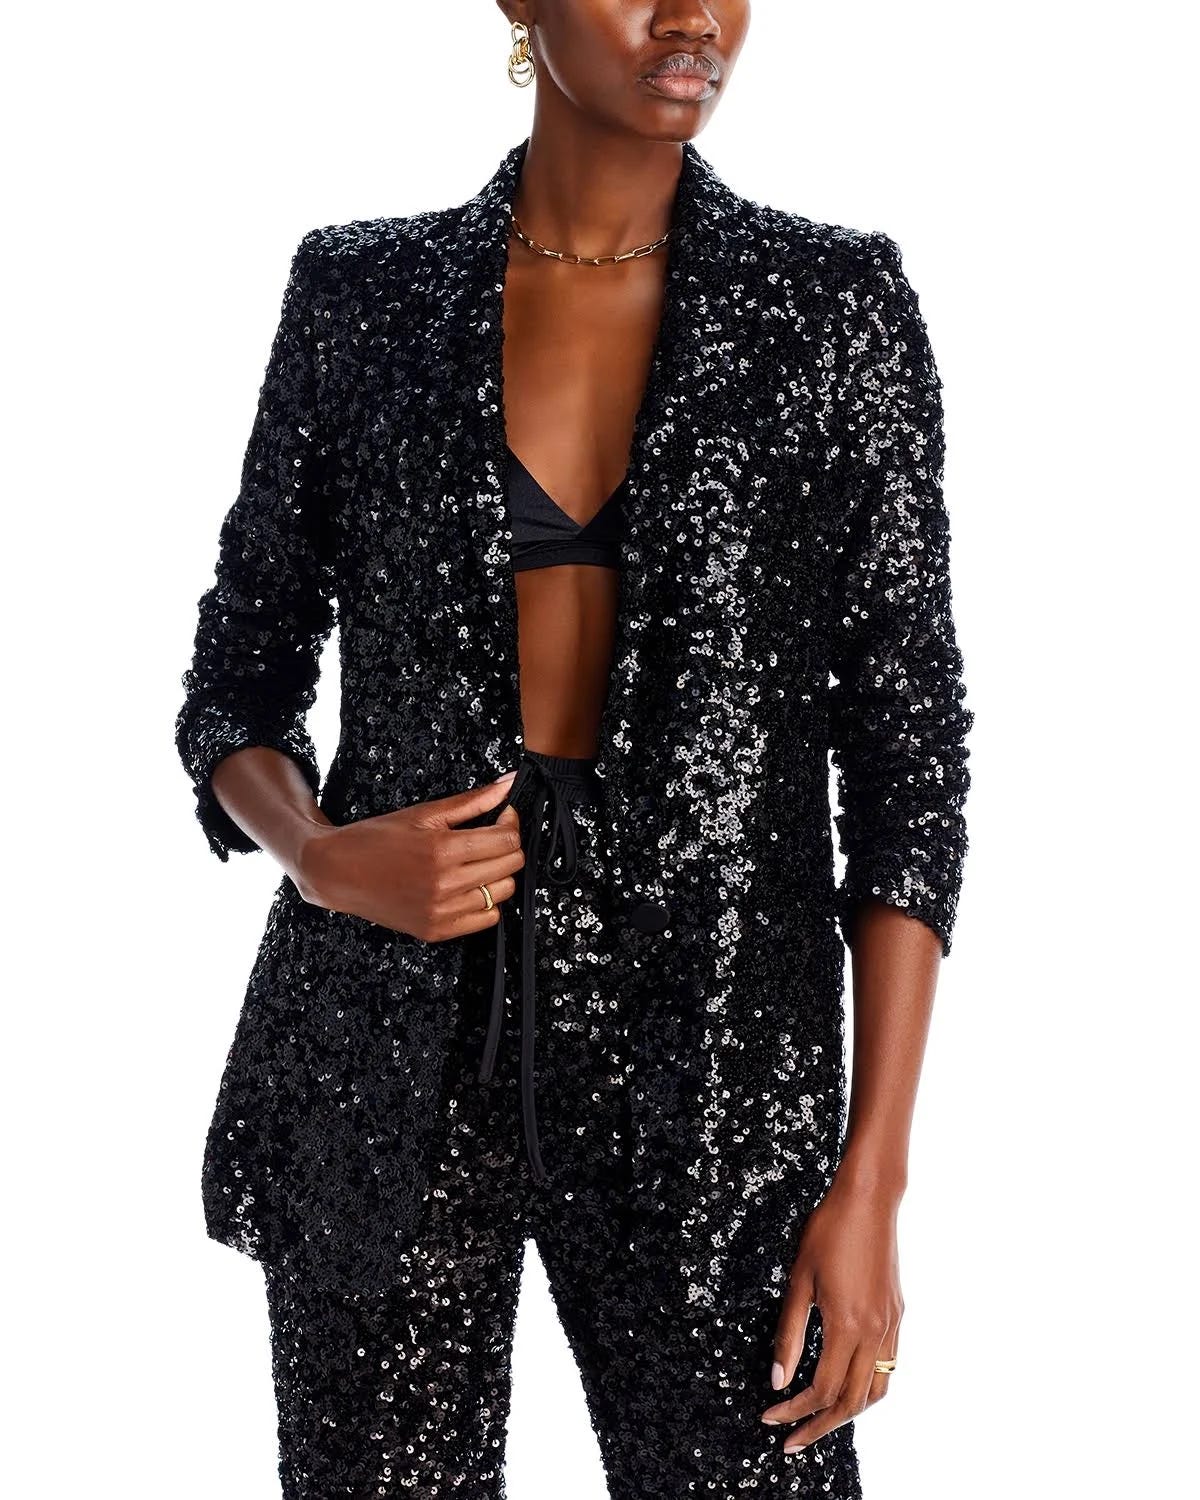 Exclusive Black Sequin Jacket for Women in Size XS | Image